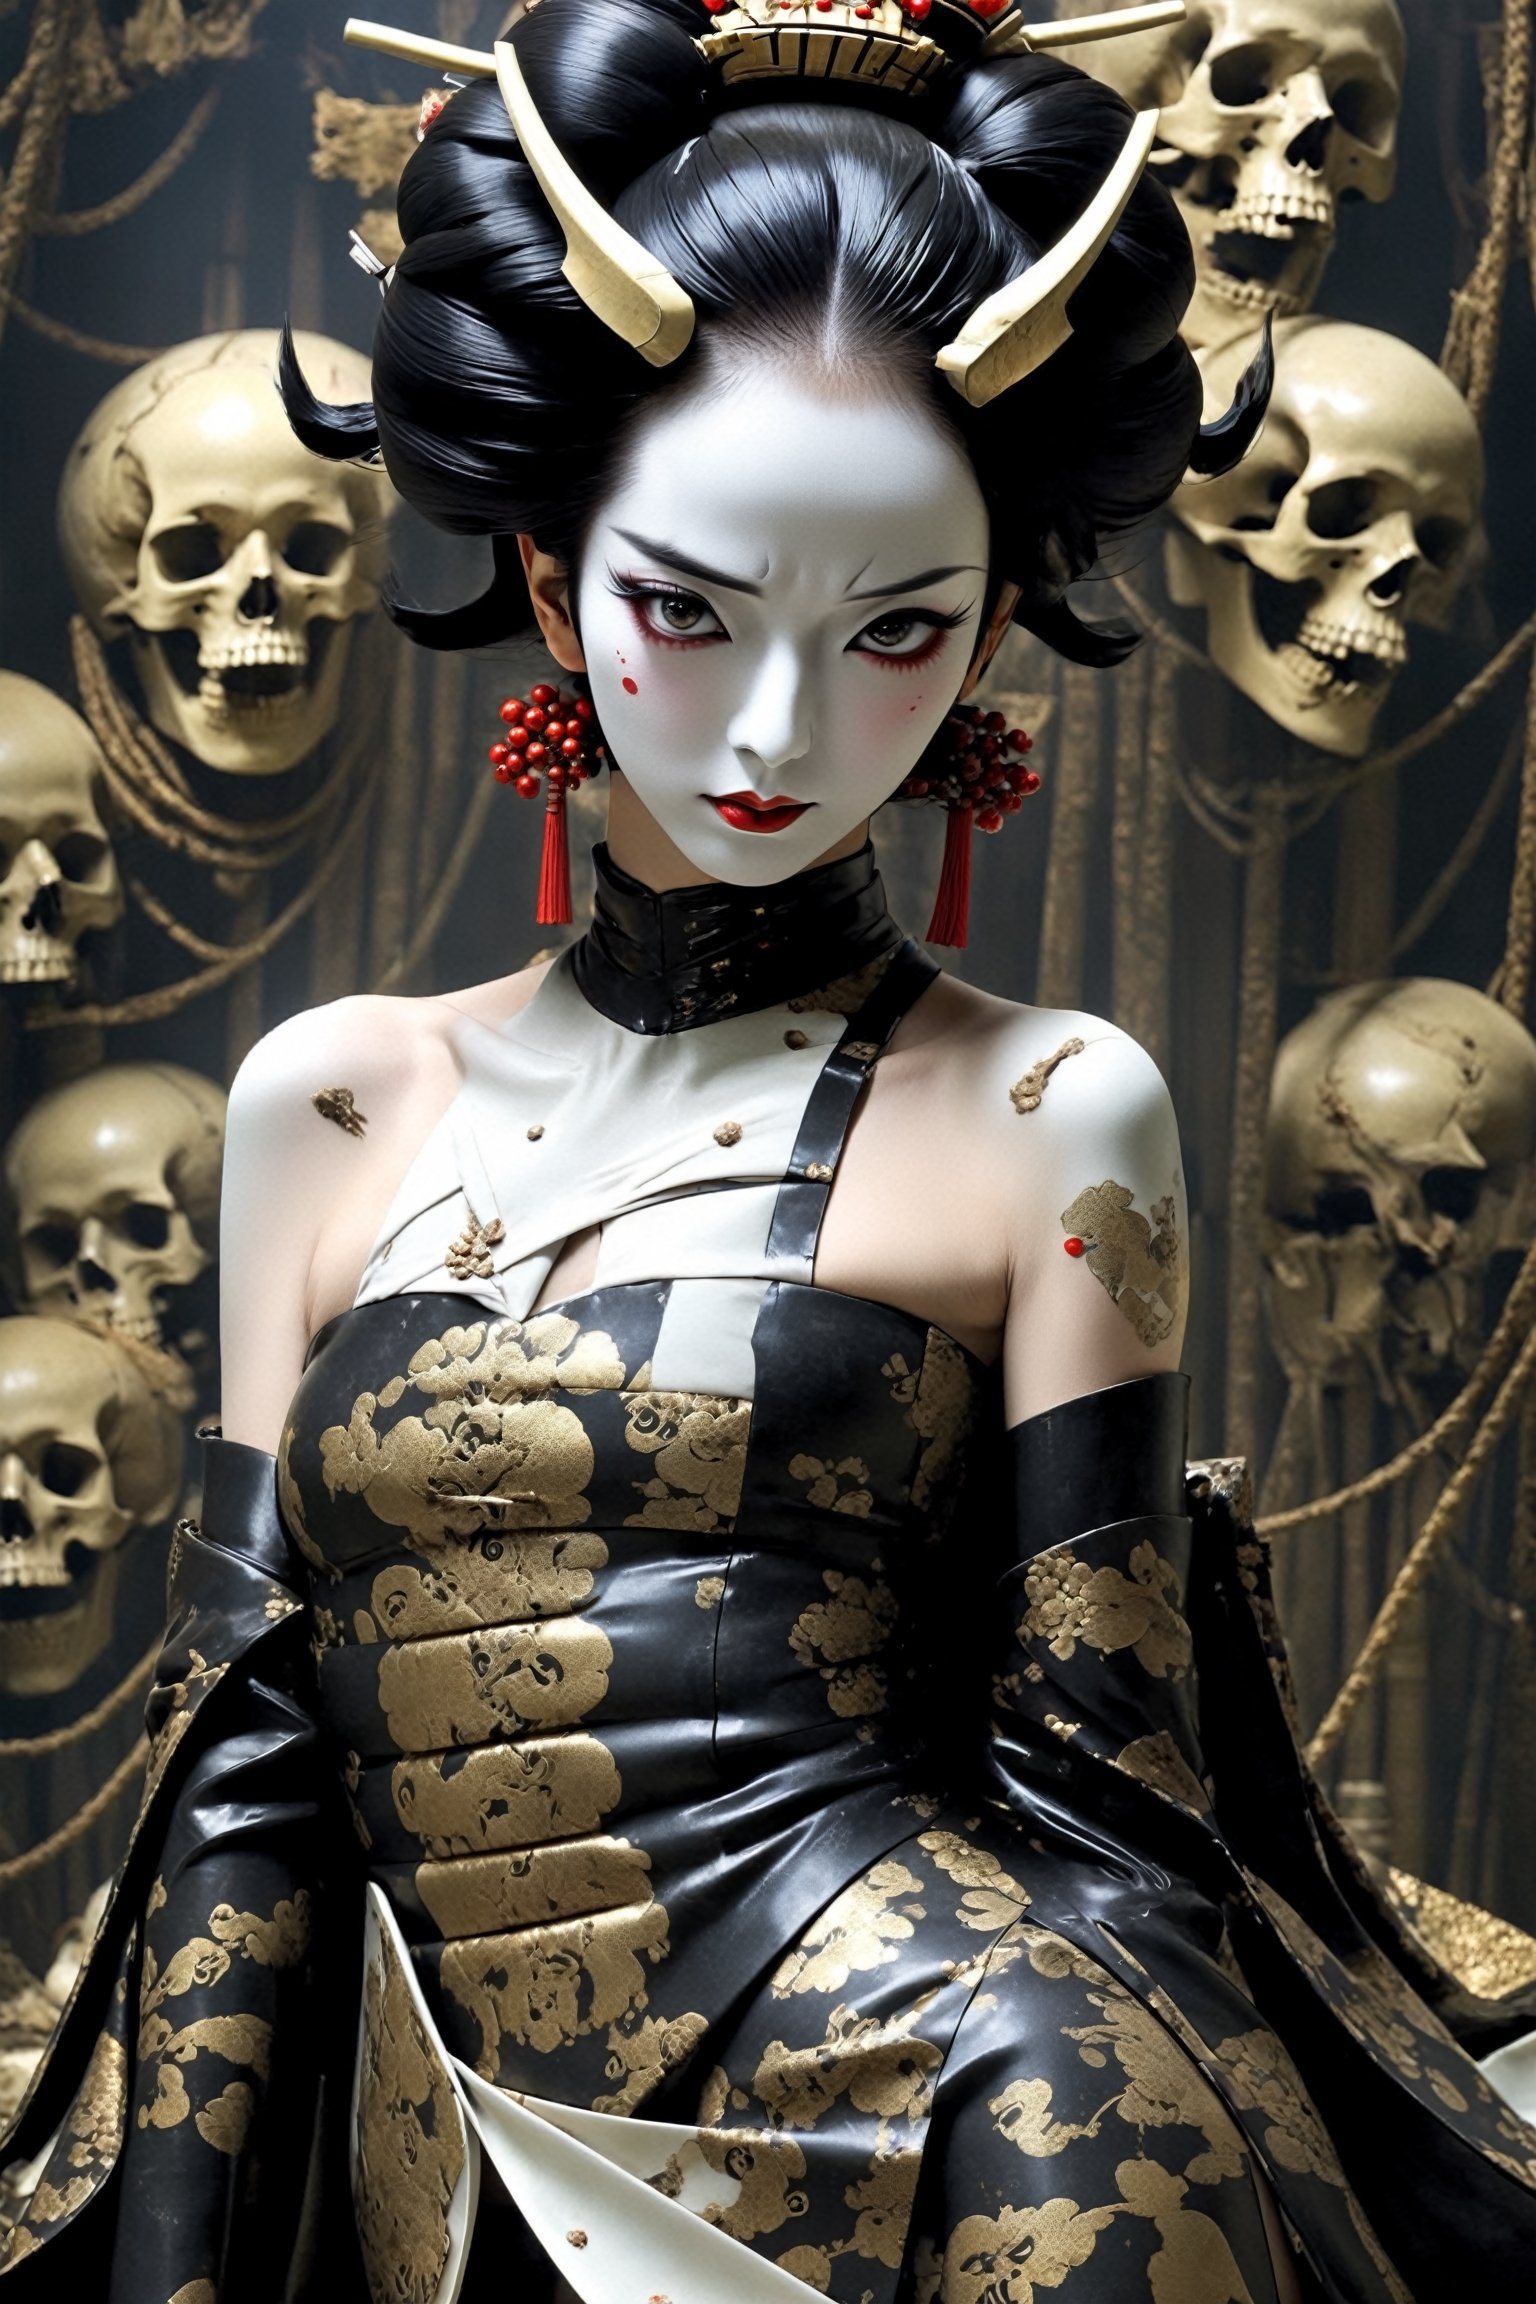 poster of a sexy  geisha [suffering,  burdened by the weight of a deception, burden]  in a  [throne of bones ], ,  very_high_resolution, latex clothing uniform, eye angle view,  , designed by  Dave Mckean,aw0k nsfwfactory,aw0k magnstyle,danknis,sooyaaa,Anime ,IMGFIX

